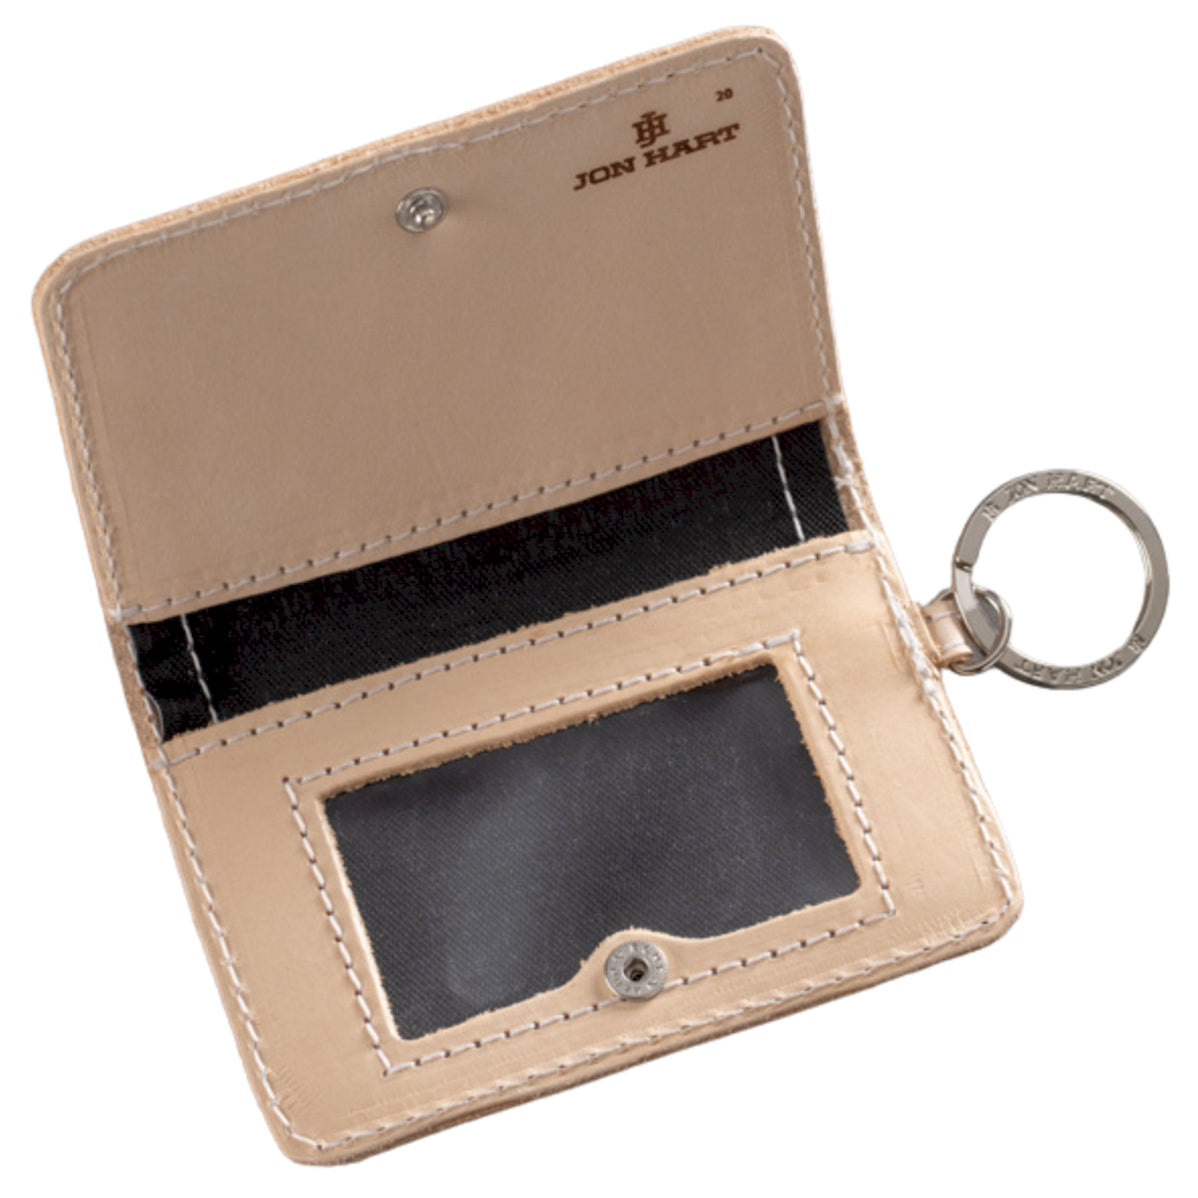 PU Leather Business ID Card Holder Credit Badge Holder Bus Card Cover Coin  Purse | eBay